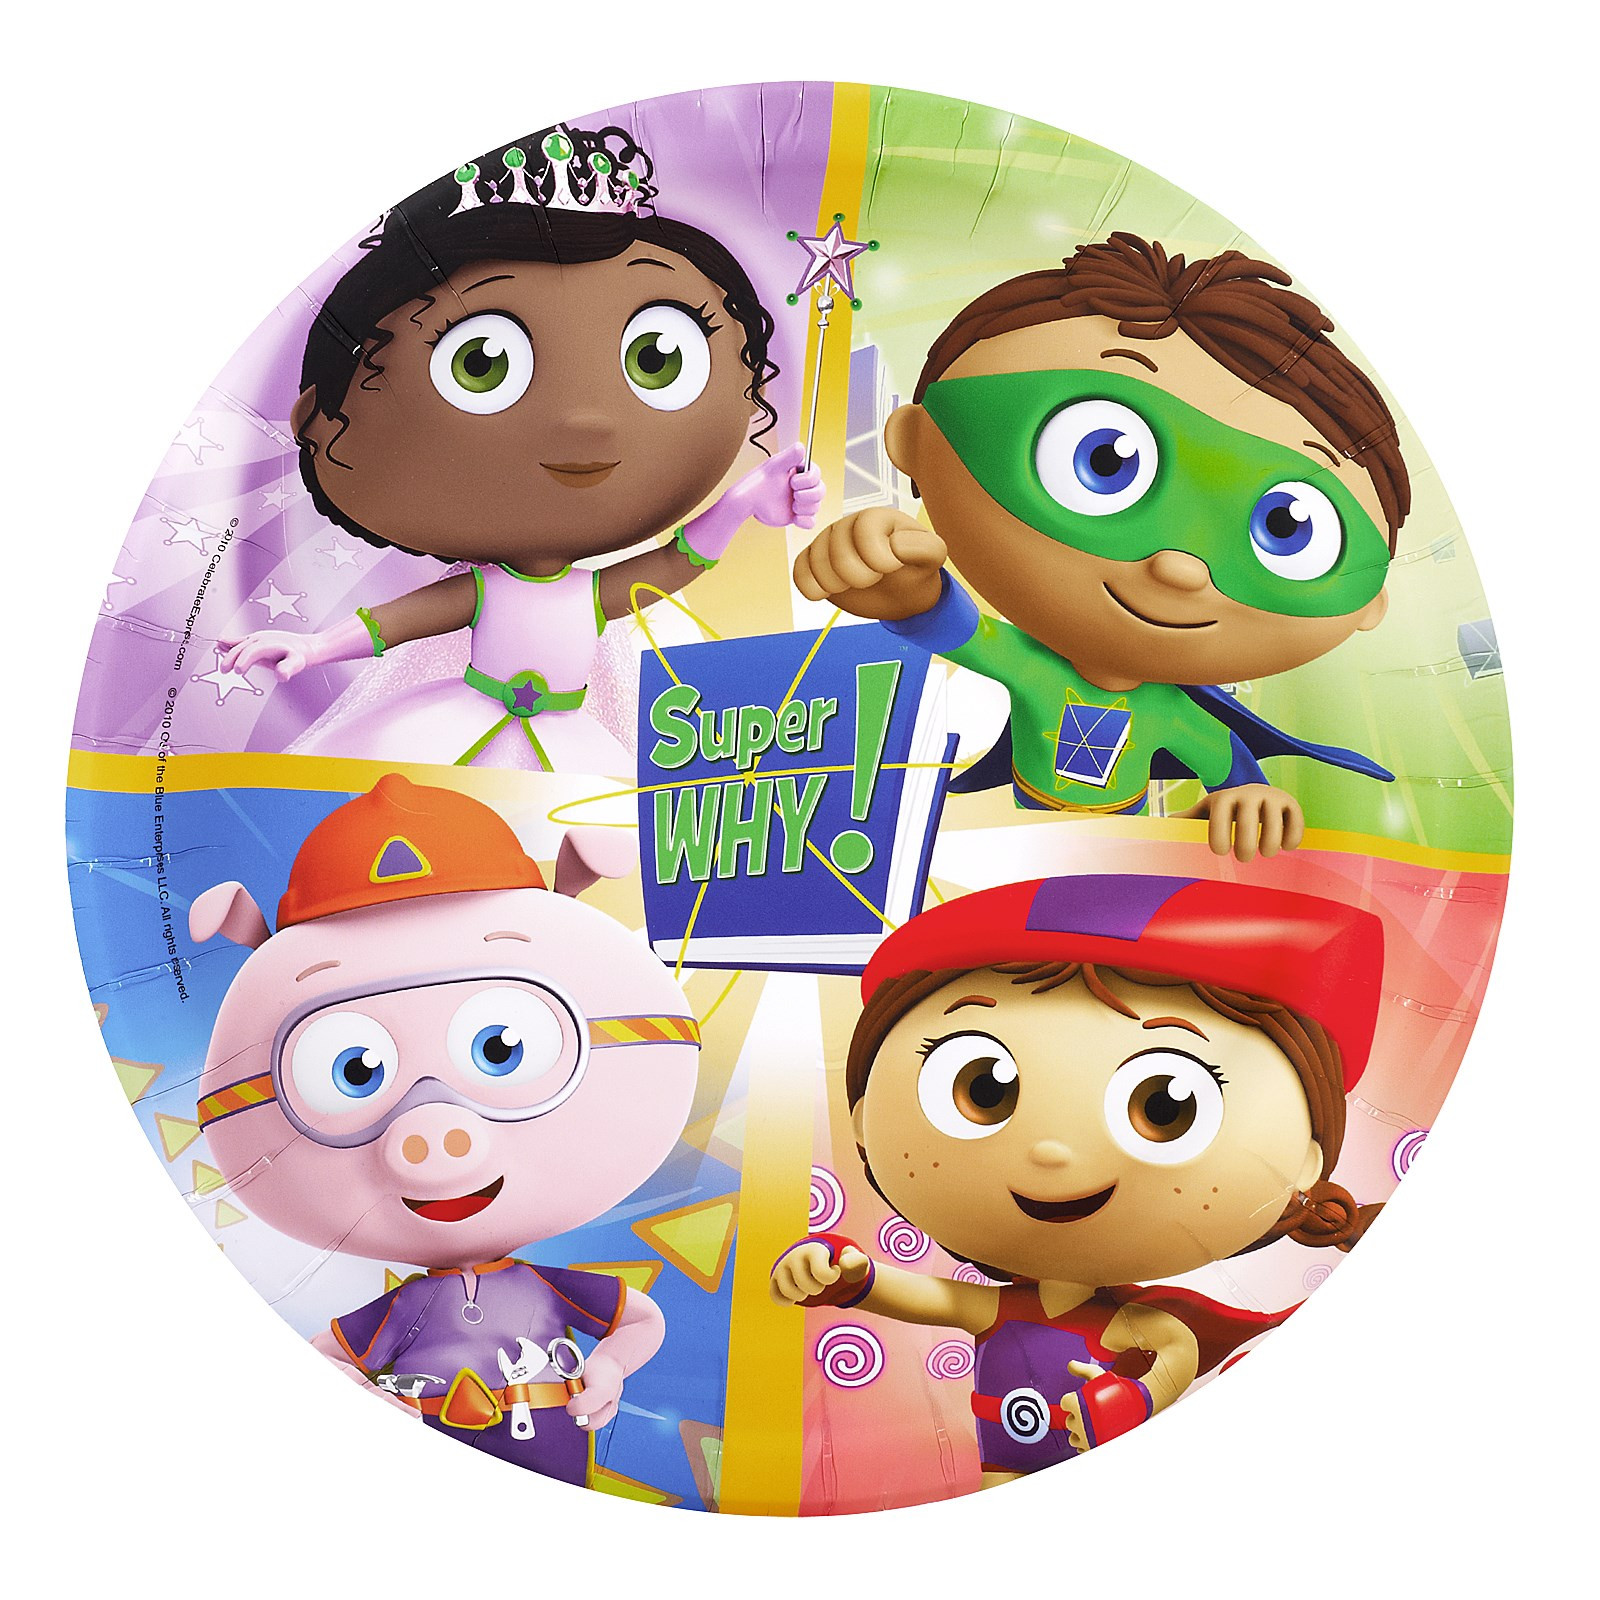 Super Why Birthday Decorations
 Super Why Dinner Plates